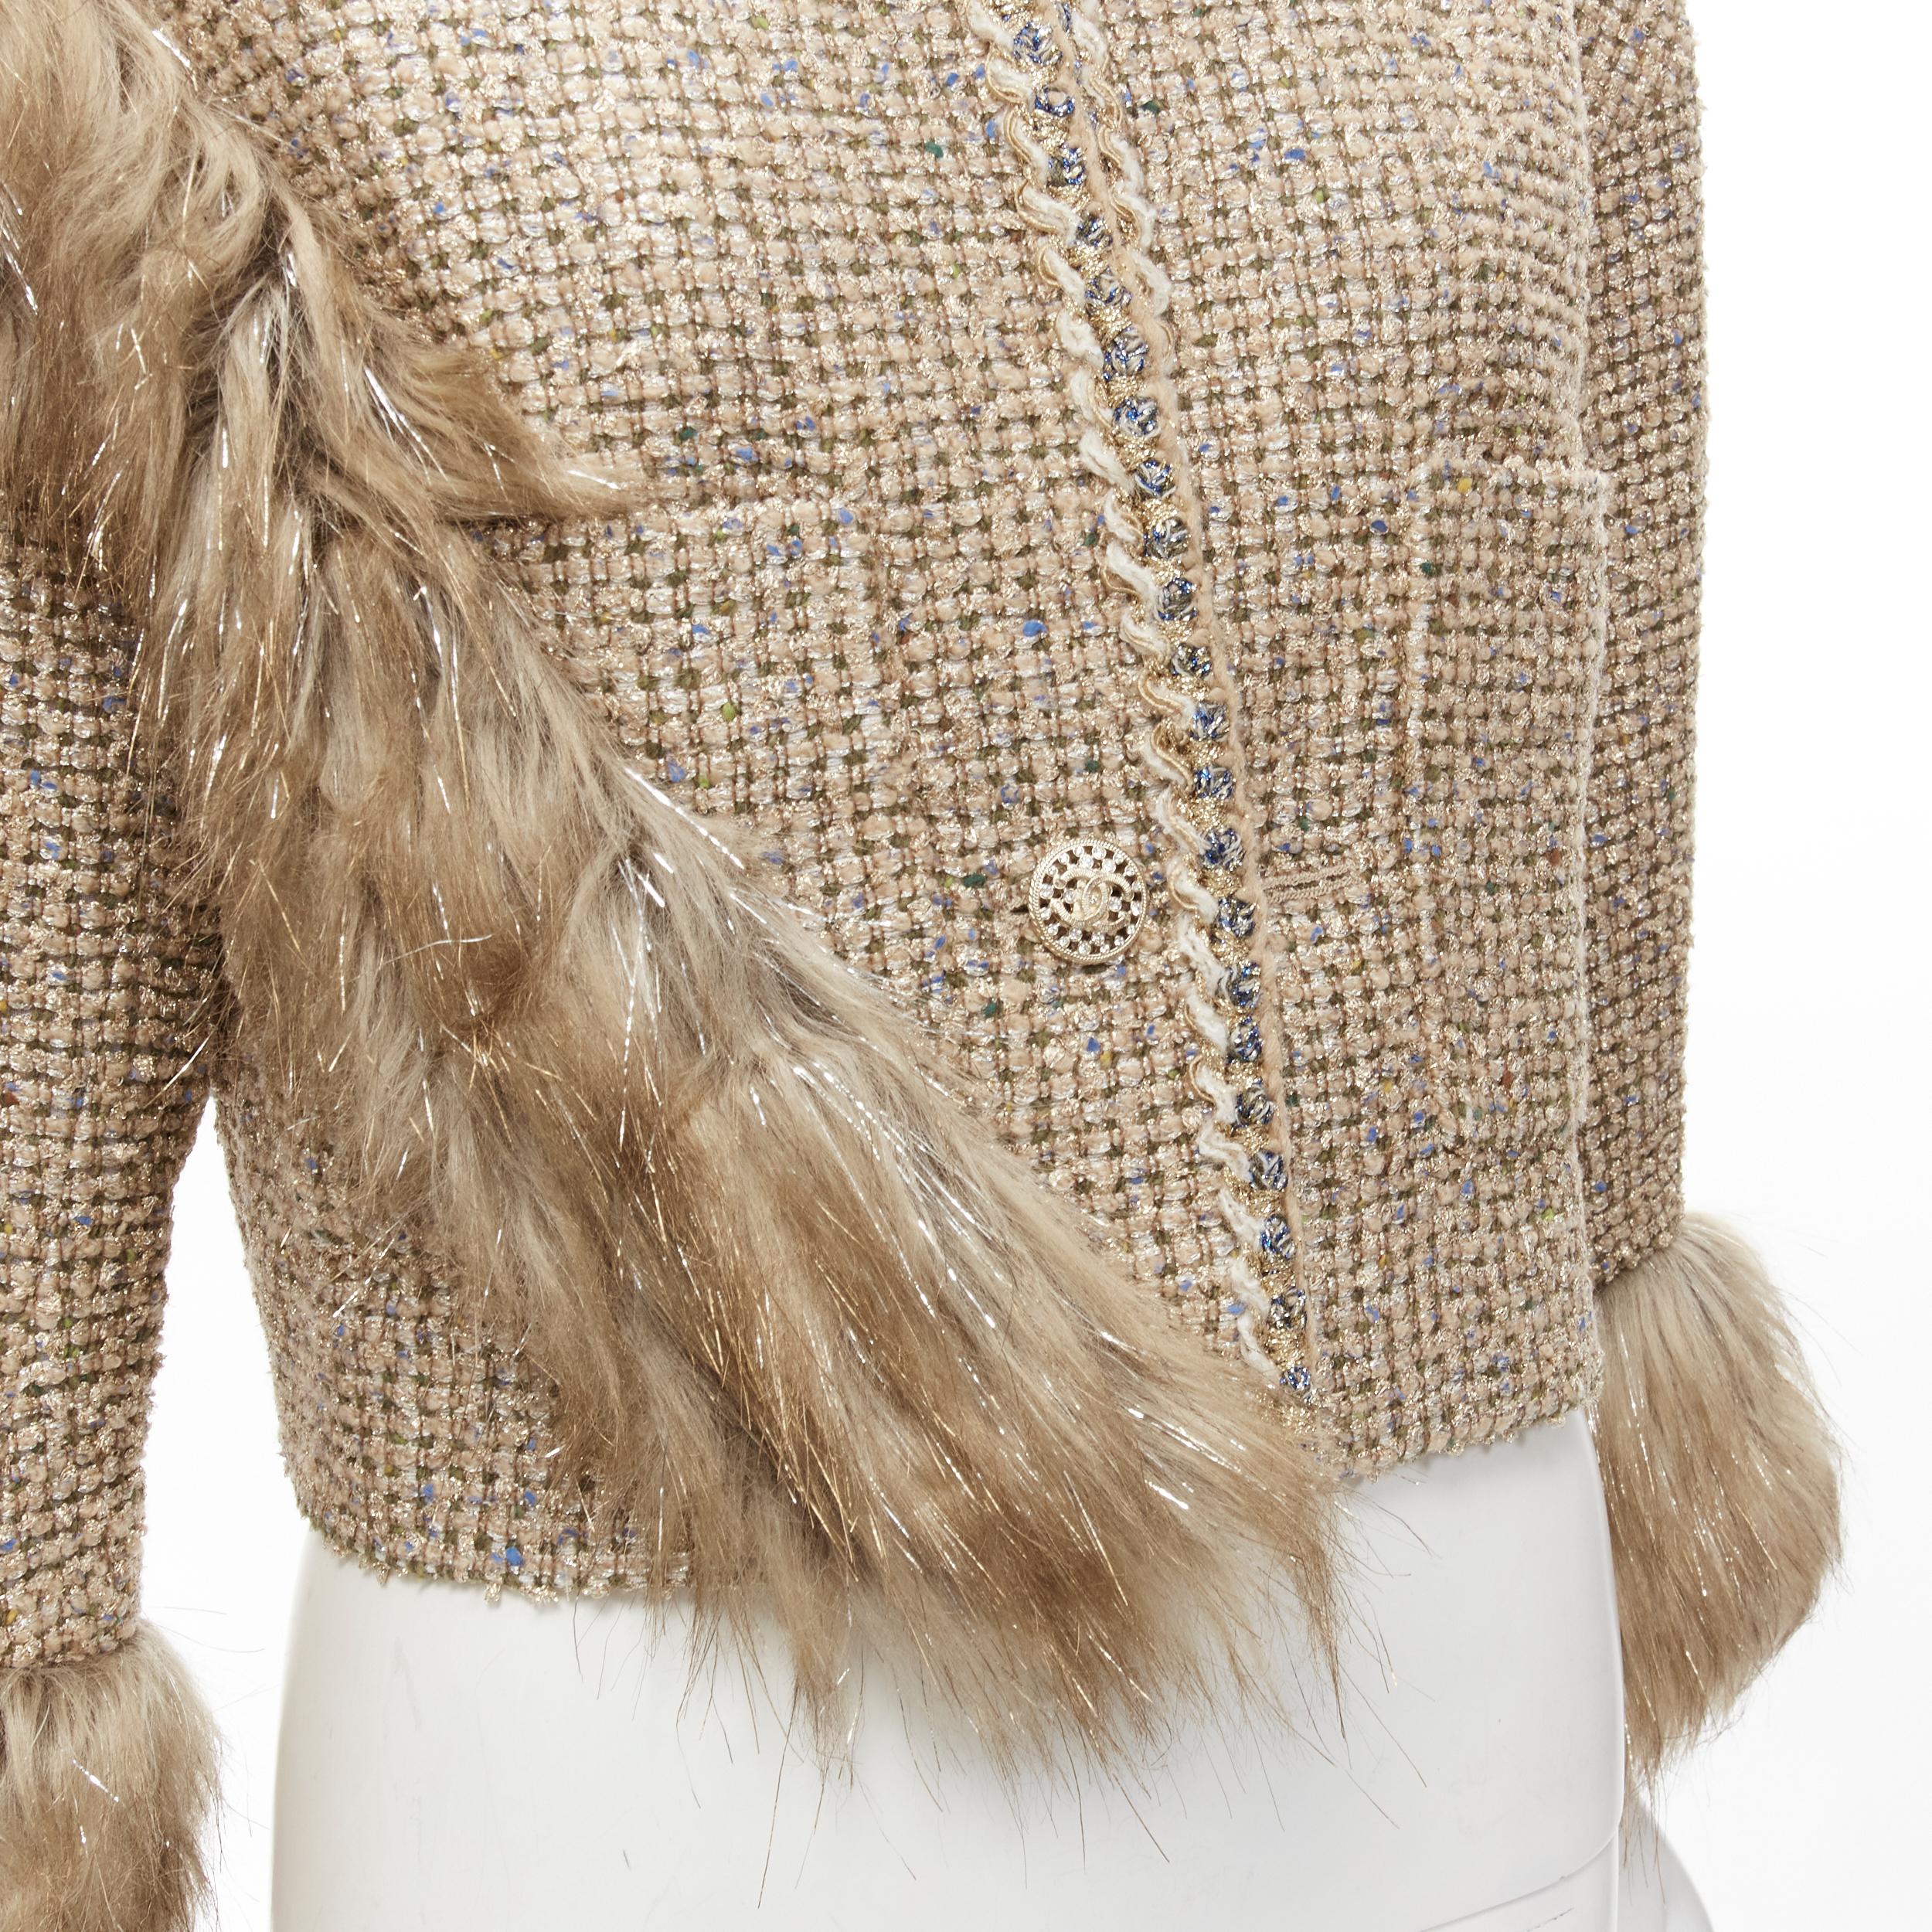 CHANEL 2021 Runway metallic gold Tweed faux fur trim cropped jacket FR34
Brand: Chanel
Designer: Virginie Viard
Collection: Fall Winter 2020 Runway
Material: Tweed
Color: Gold
Pattern: Solid
Closure: Button
Extra Detail: Metallic gold and blue lurex